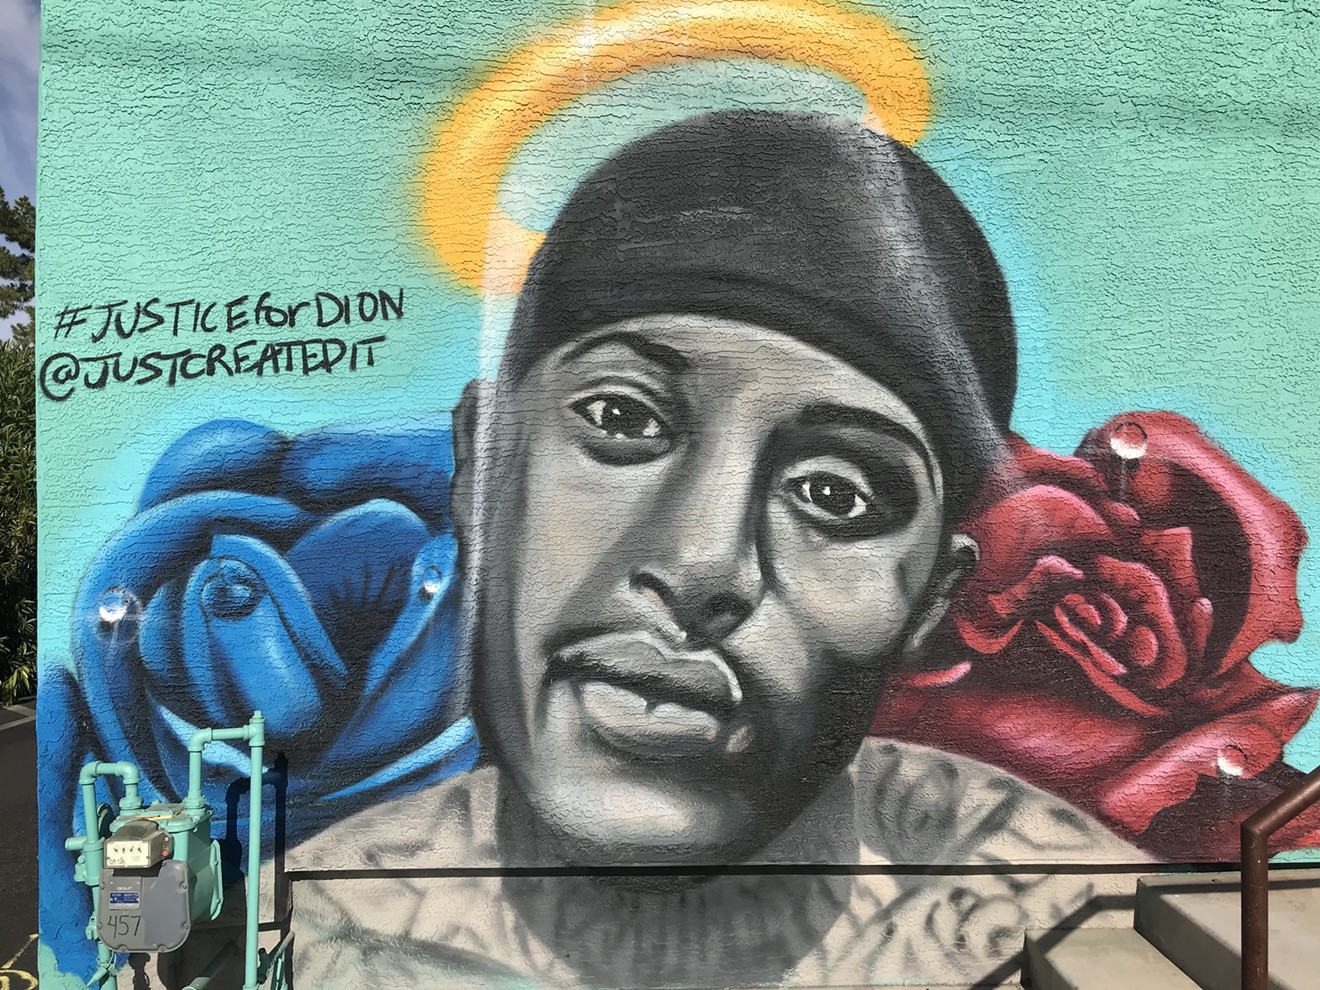 A mural on Seventh Street north of McDowell Street memorializes Johnson.